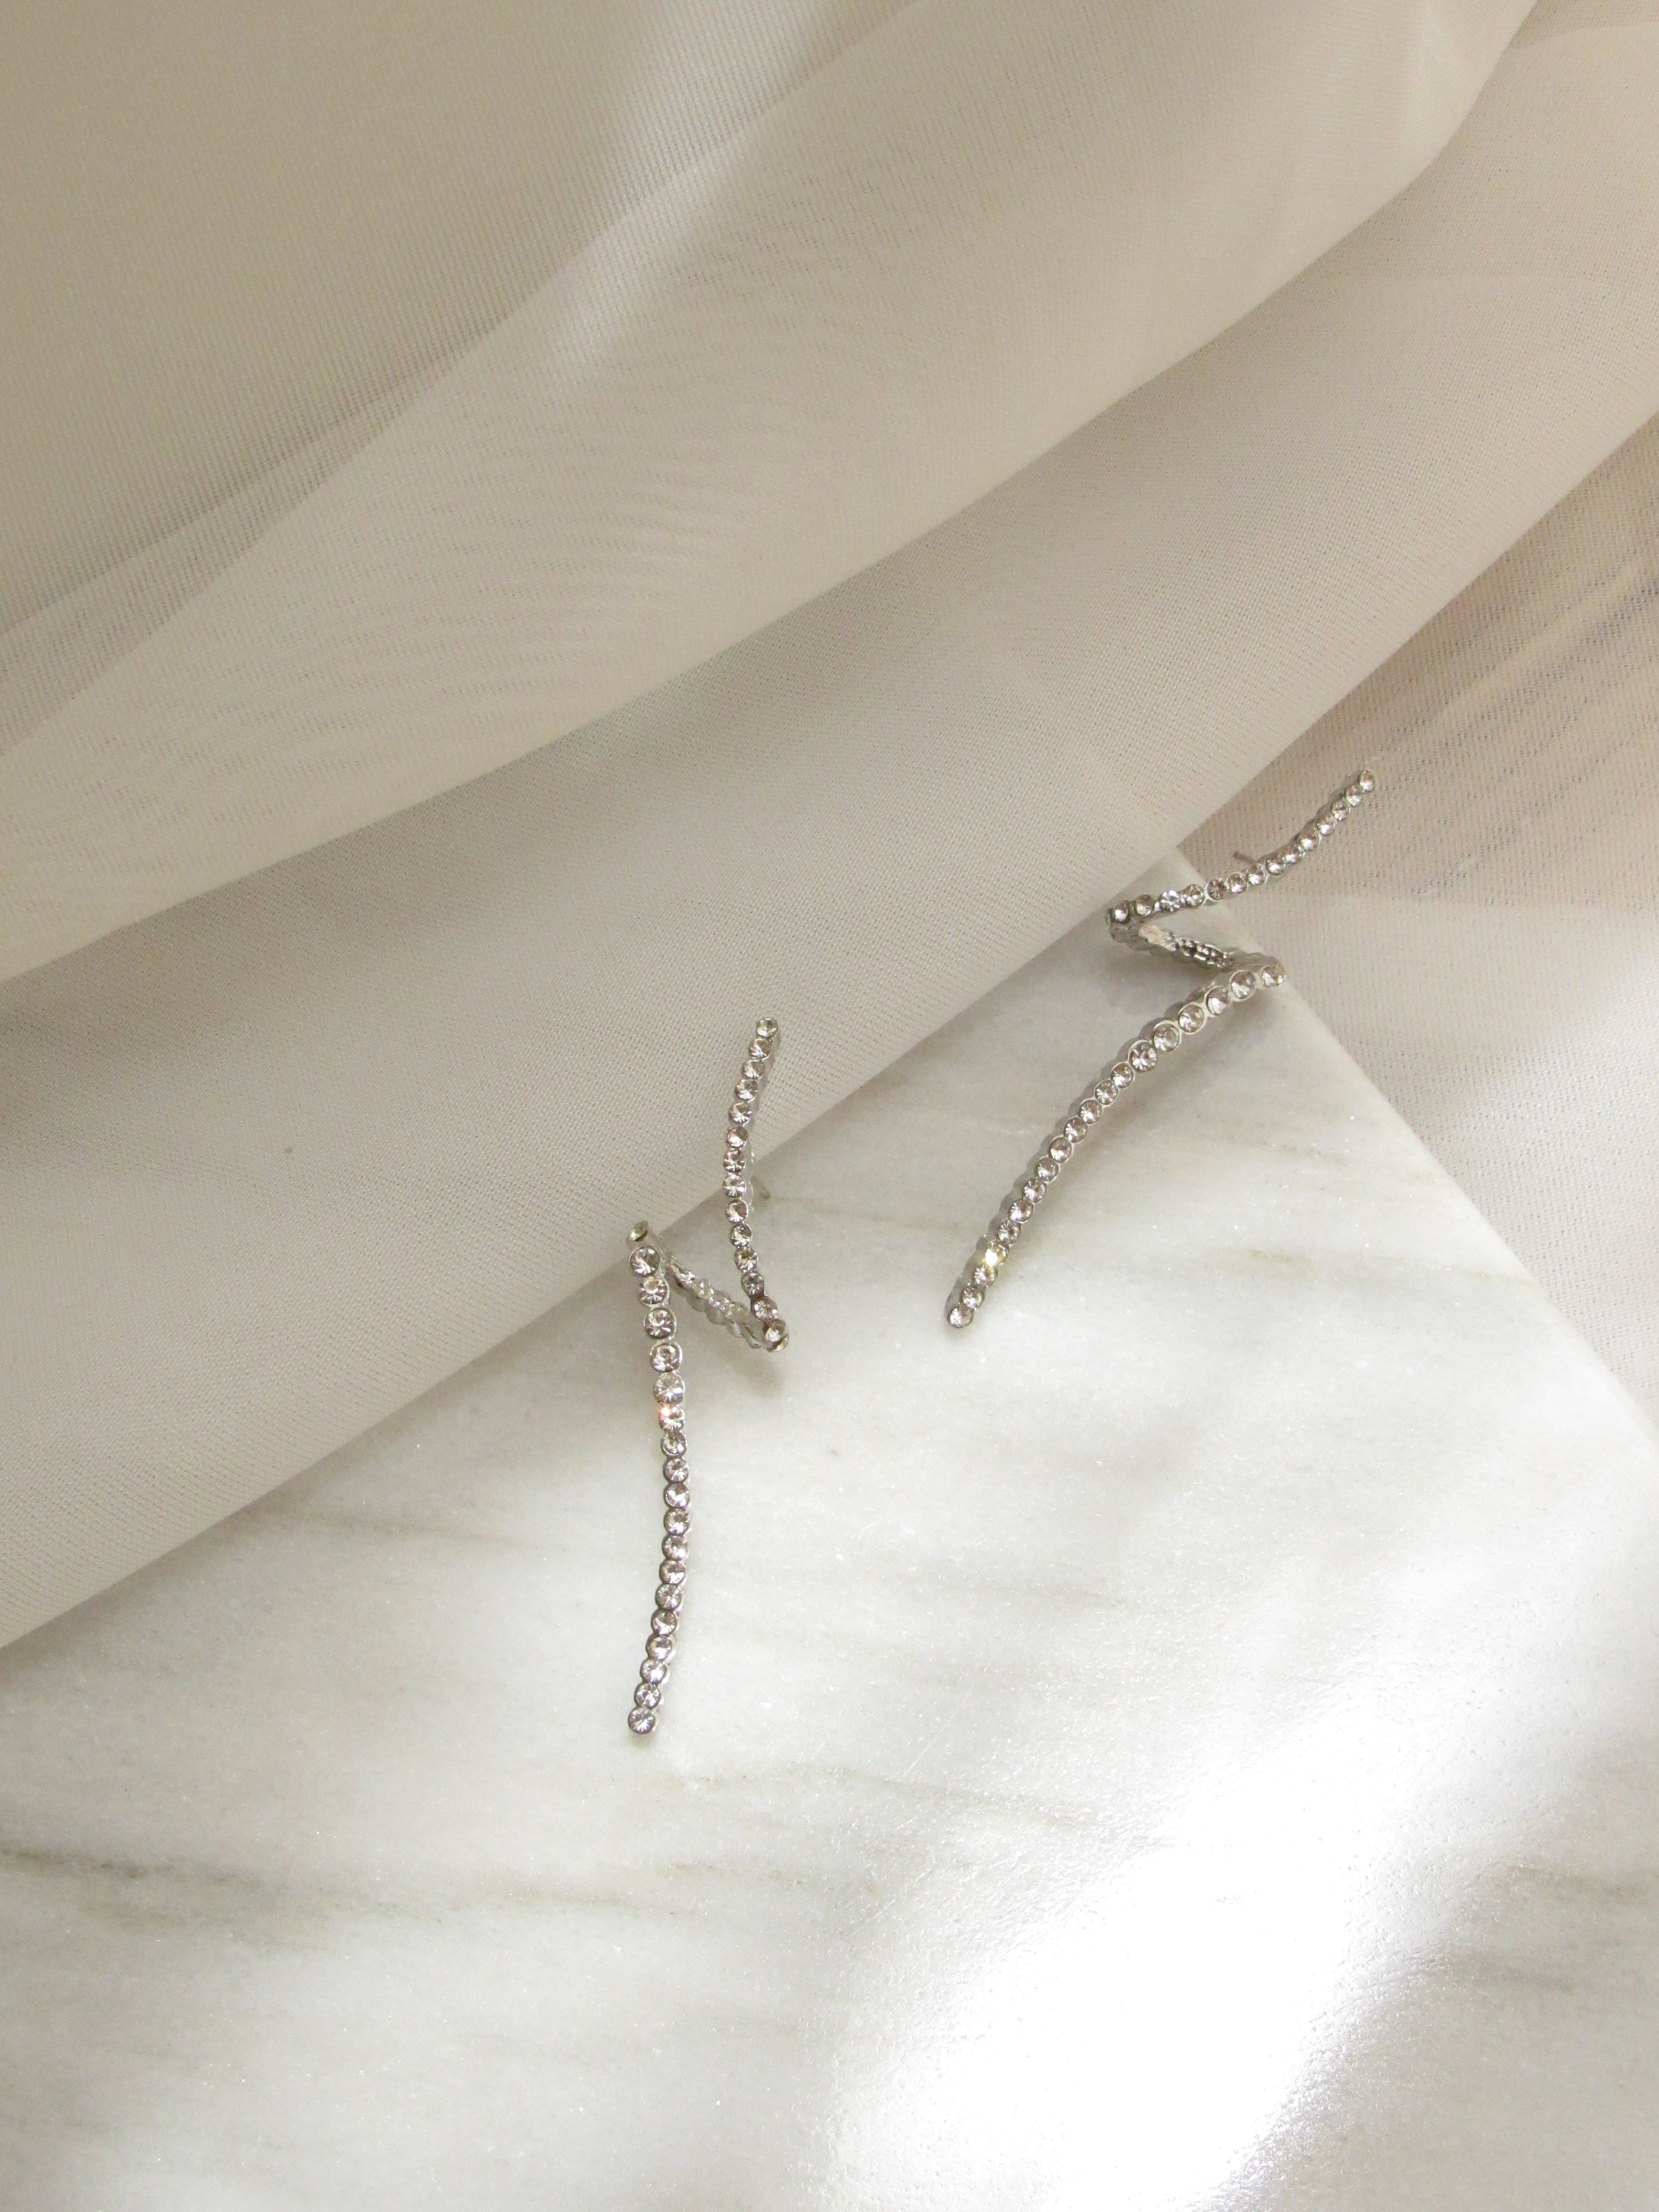 Spiral Silver Earrings with Crystal